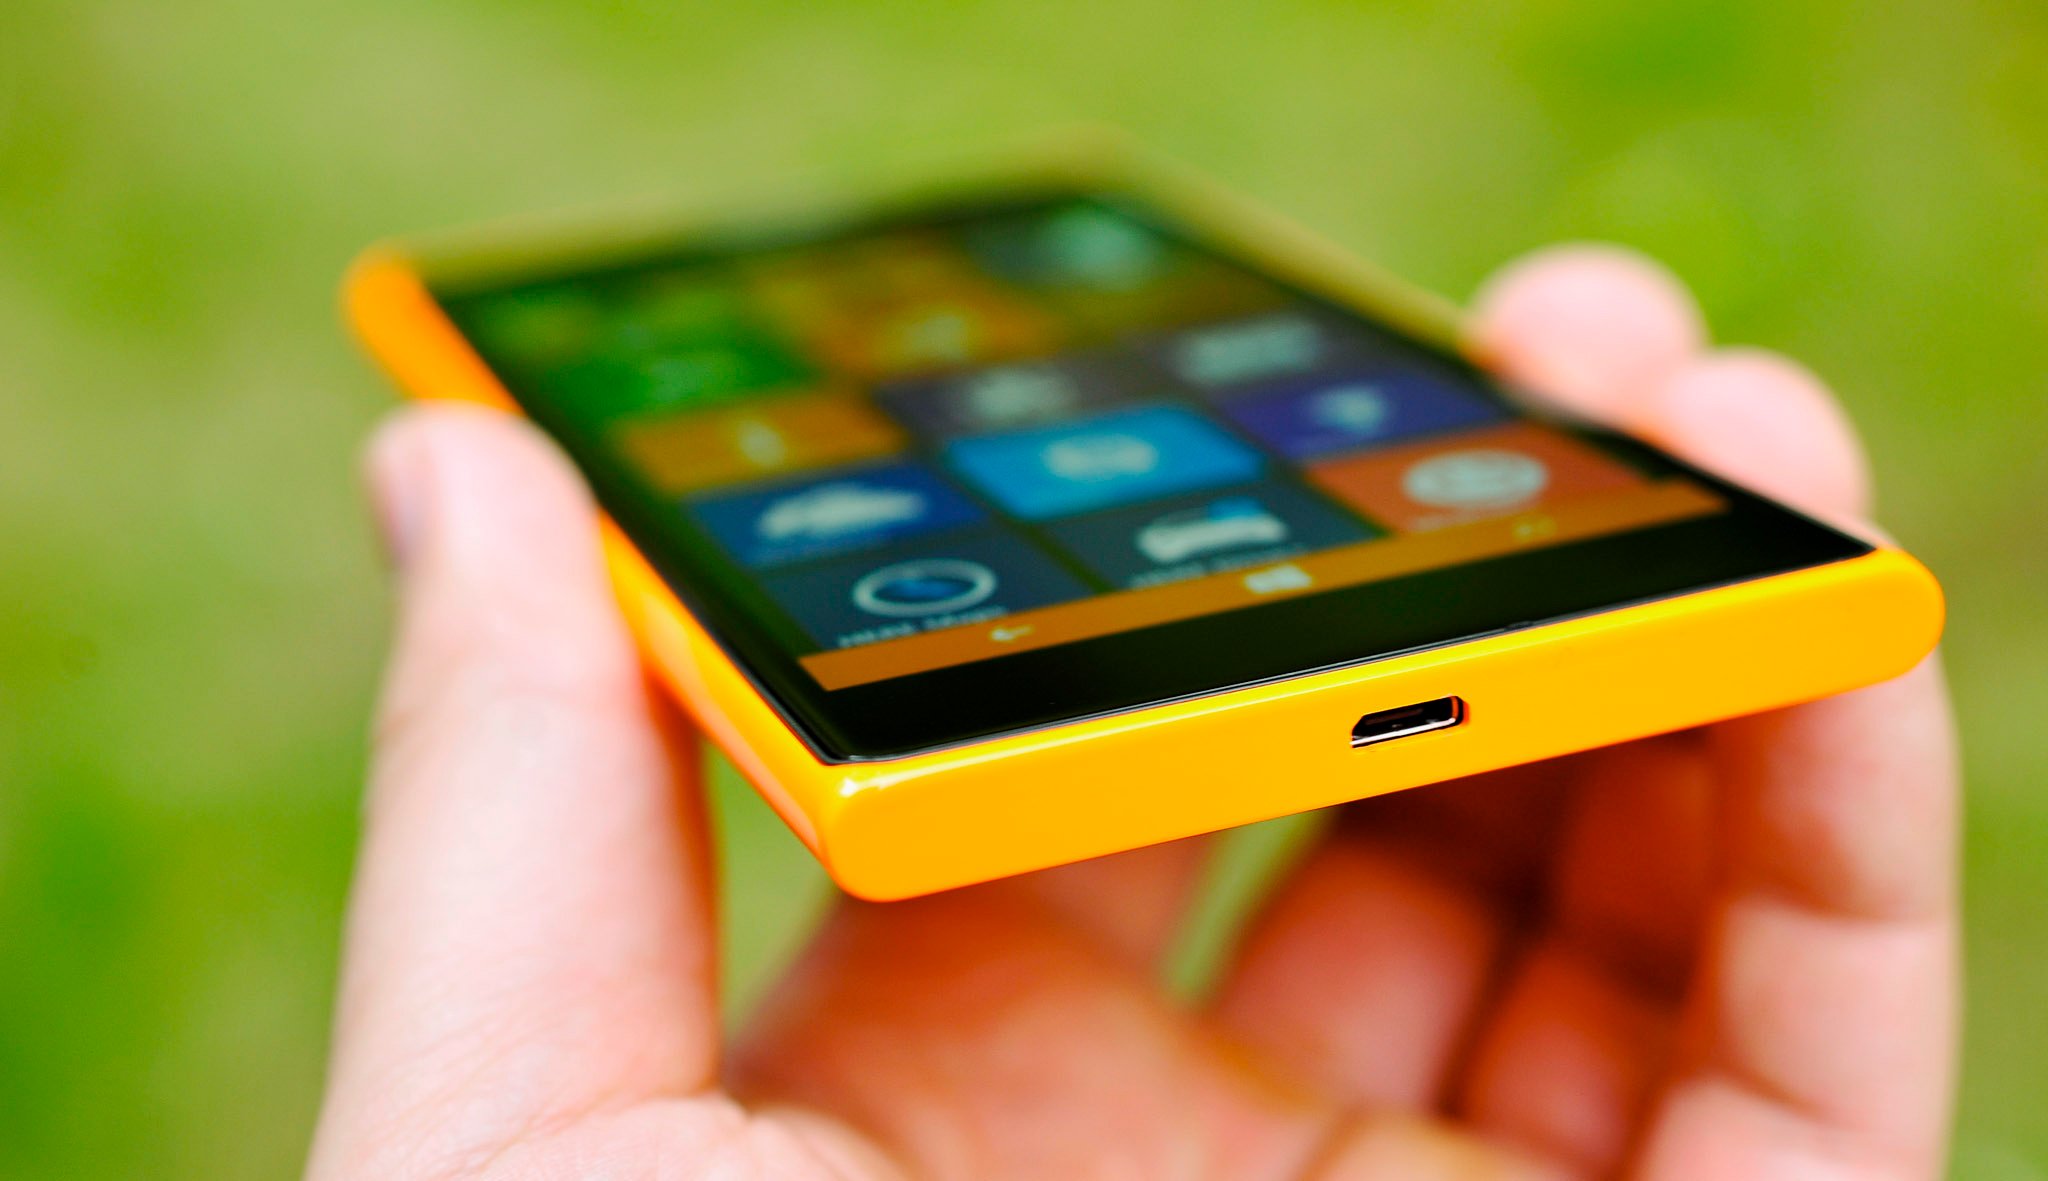 Nokia Lumia 735: Unboxing and first look - YouTube